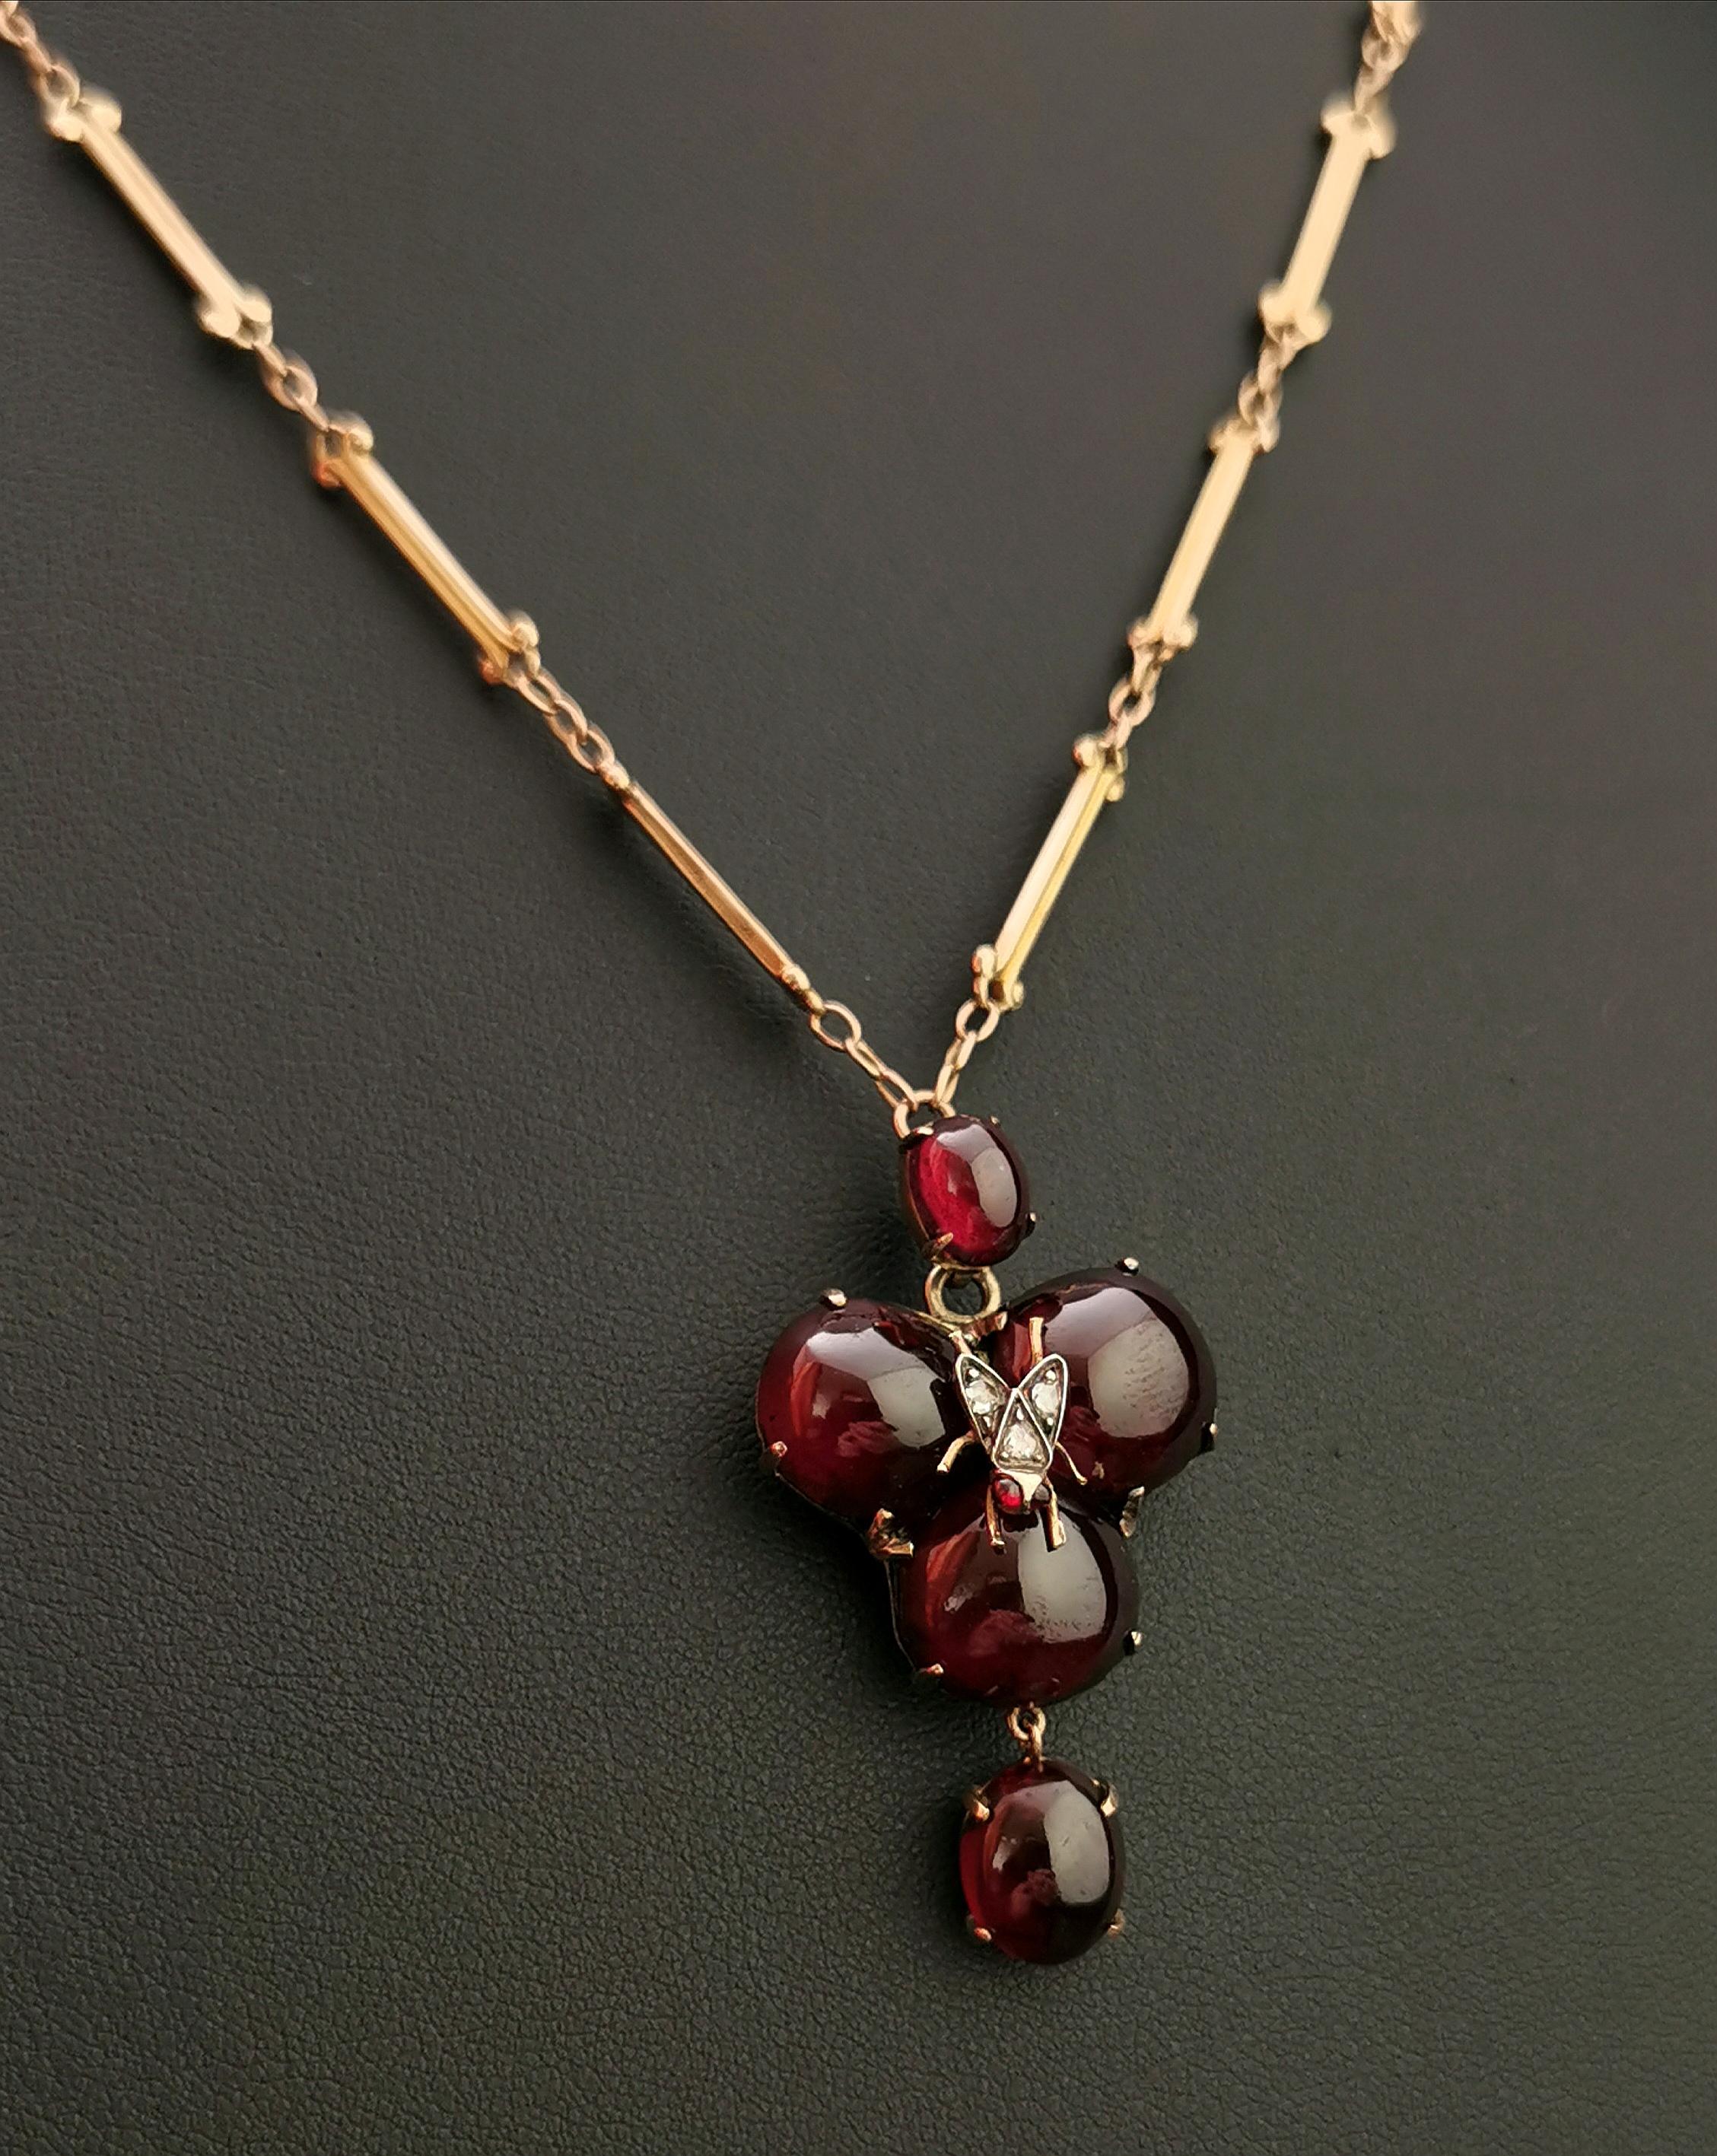 Victorian Mourning Pendant Necklace, Garnet, Diamond Fly, 18 Karat Yellow Gold For Sale 2